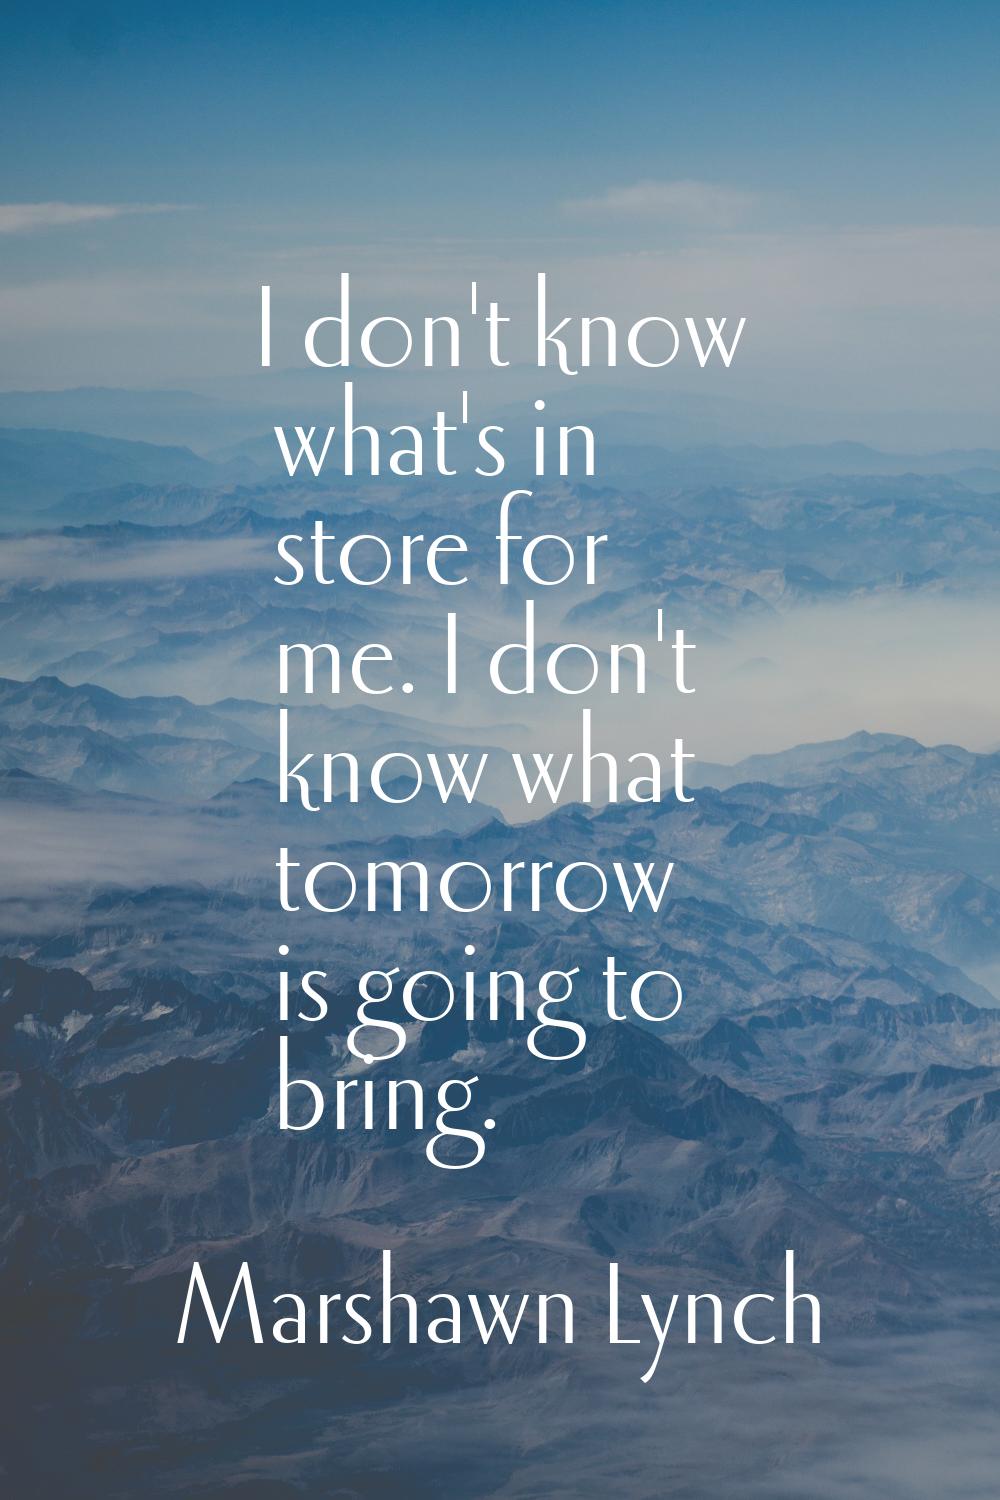 I don't know what's in store for me. I don't know what tomorrow is going to bring.